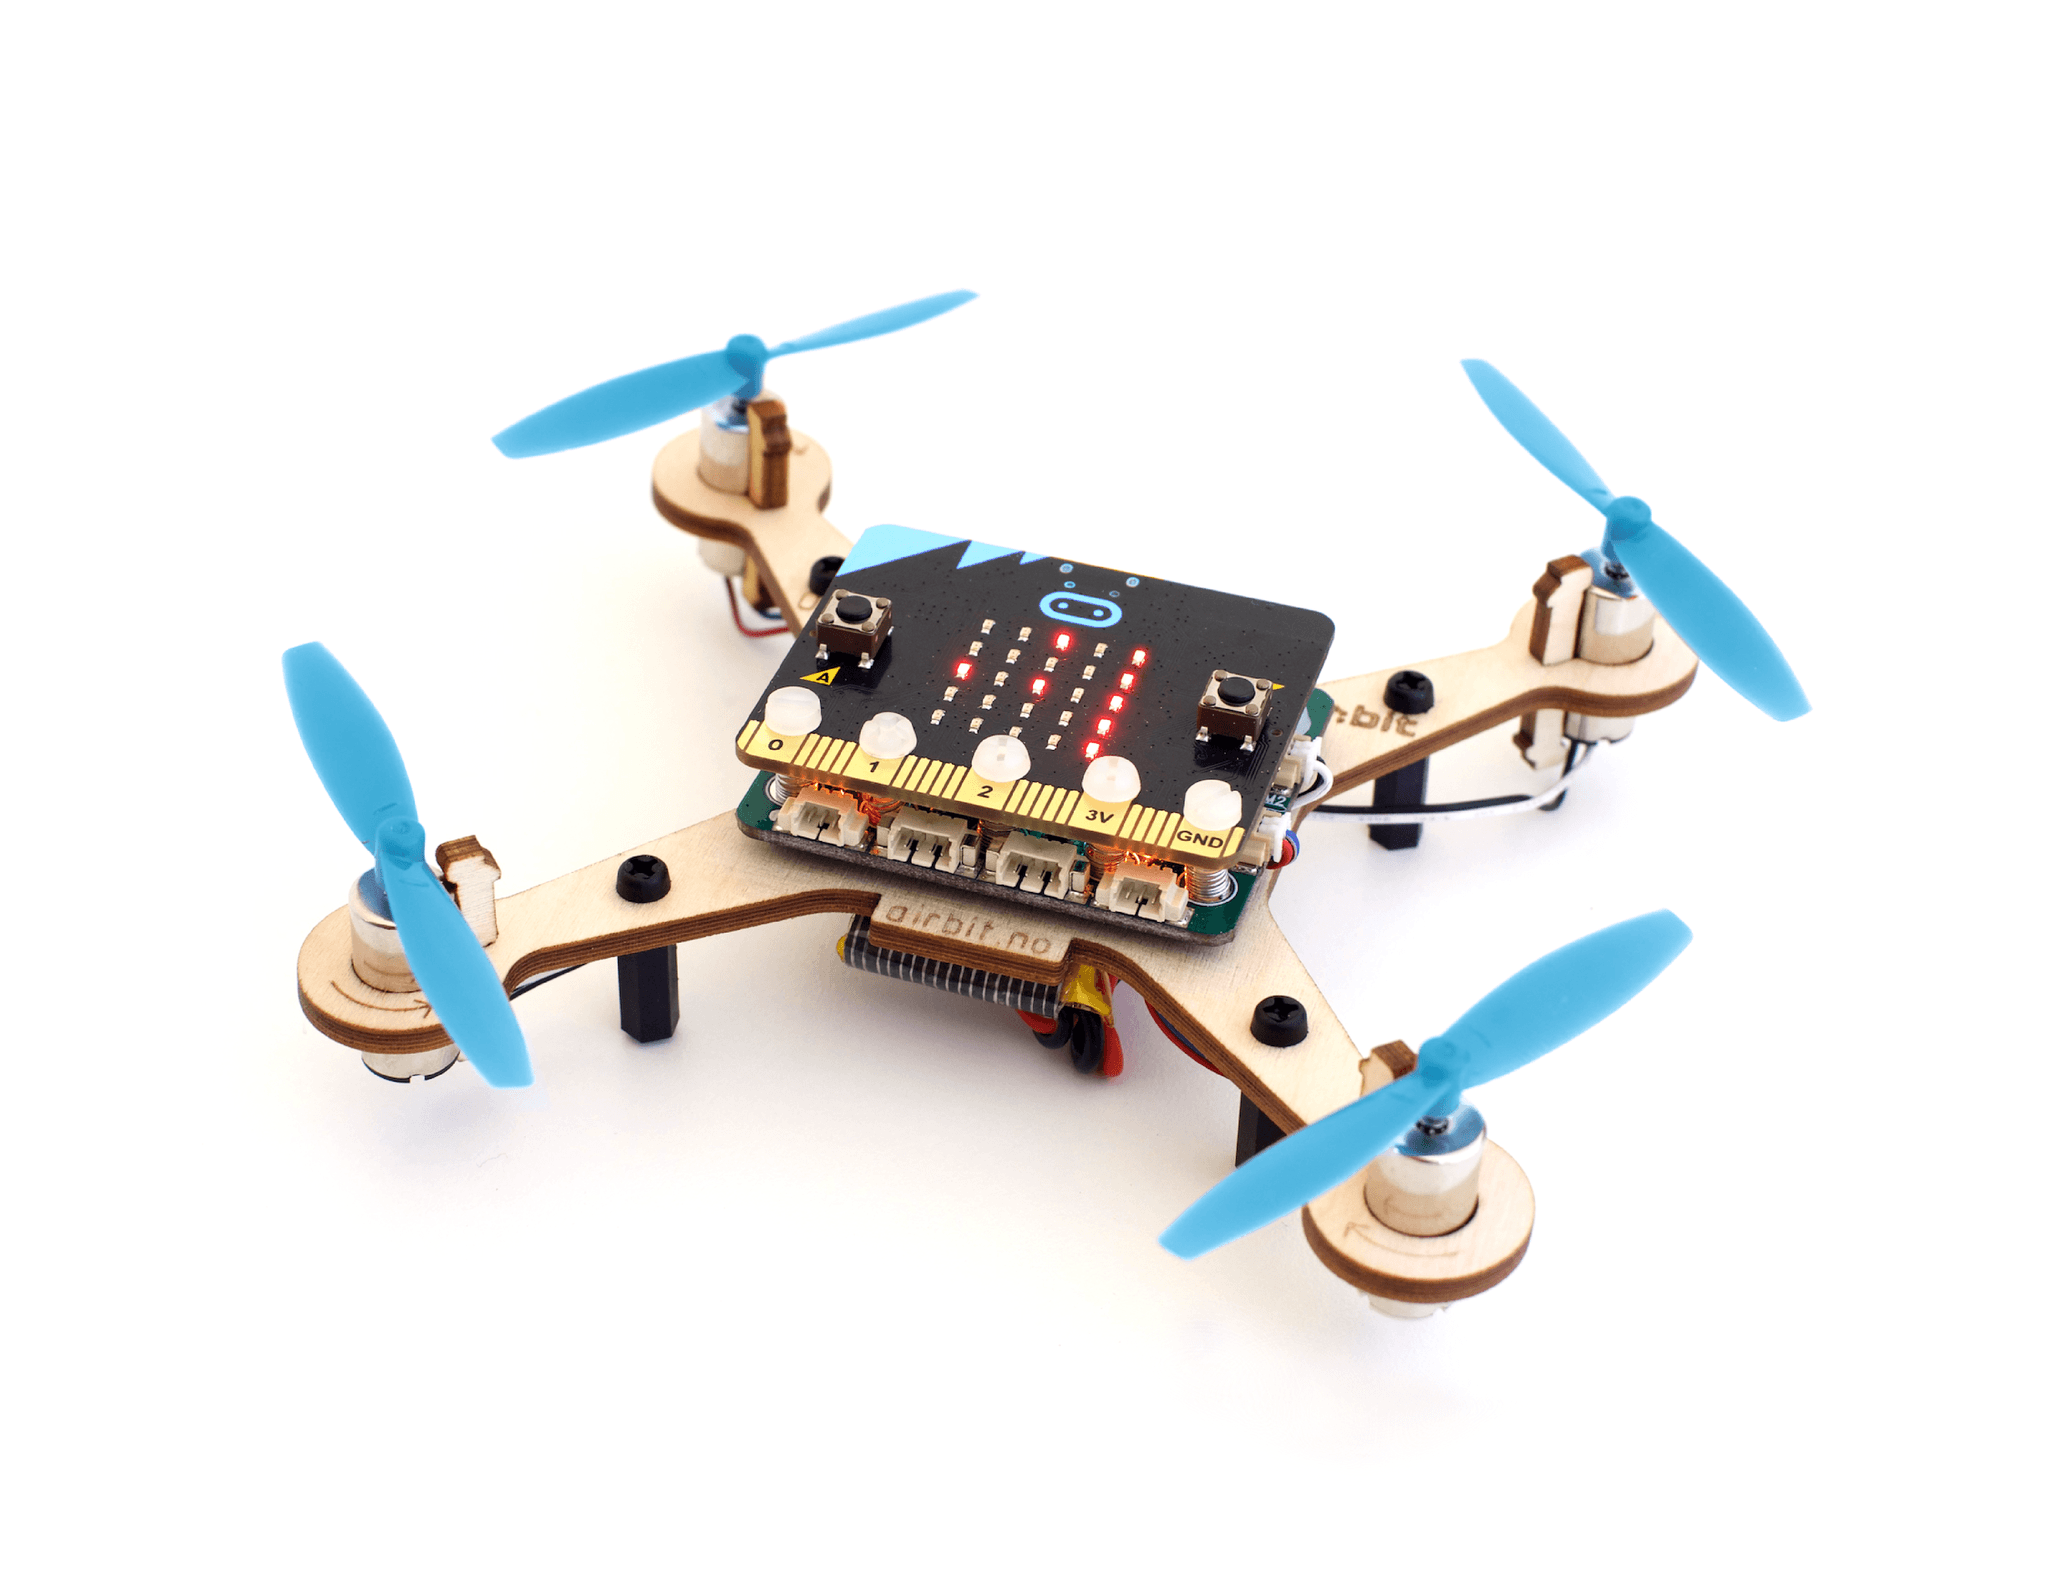 The micro:bit evolution with Drones and much more